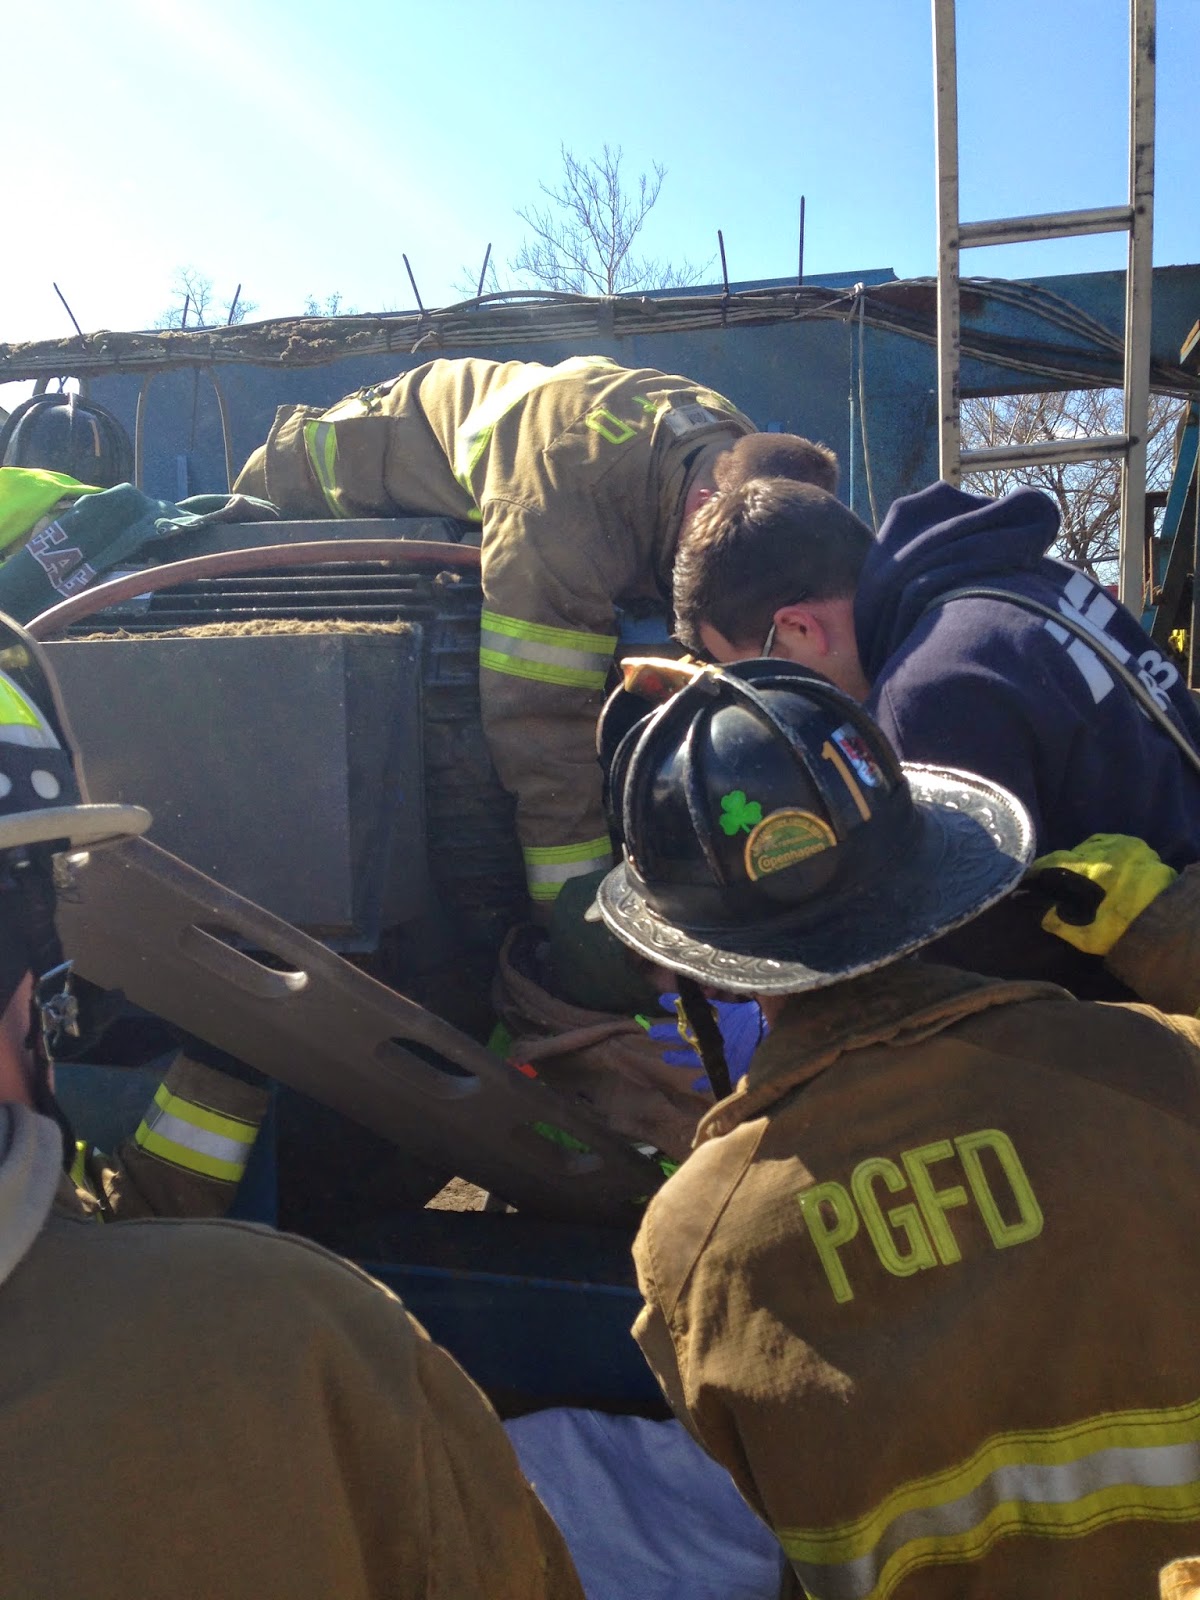 Man rescued from conveyor belt at local recycling center